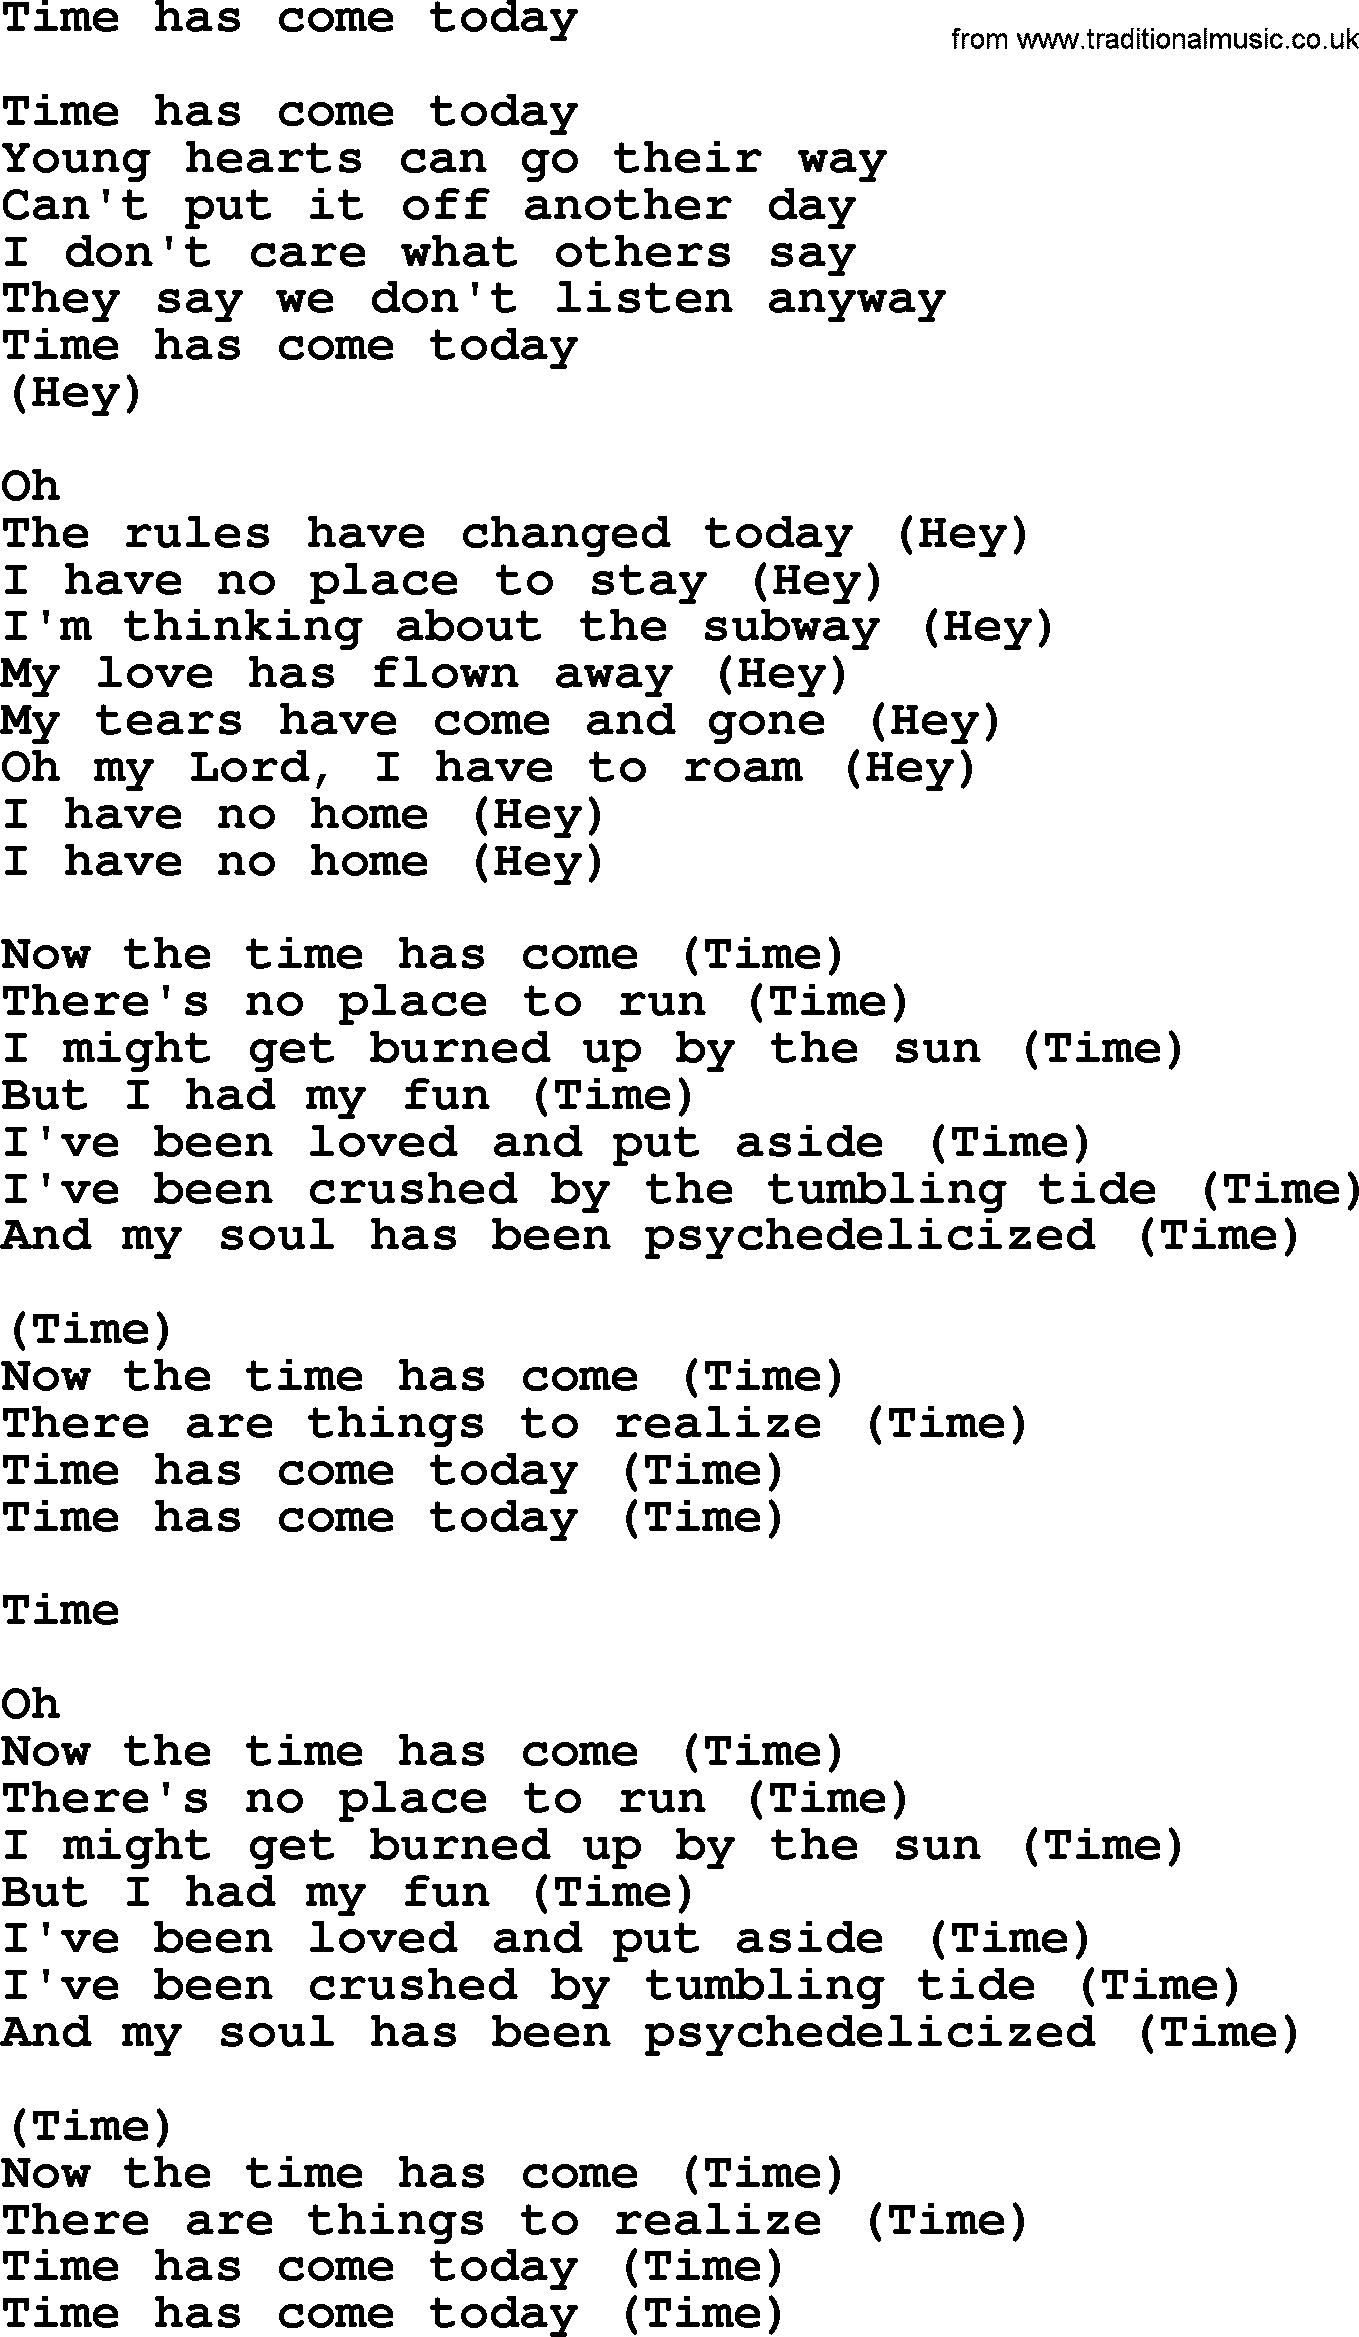 The Byrds song Time Has Come Today, lyrics